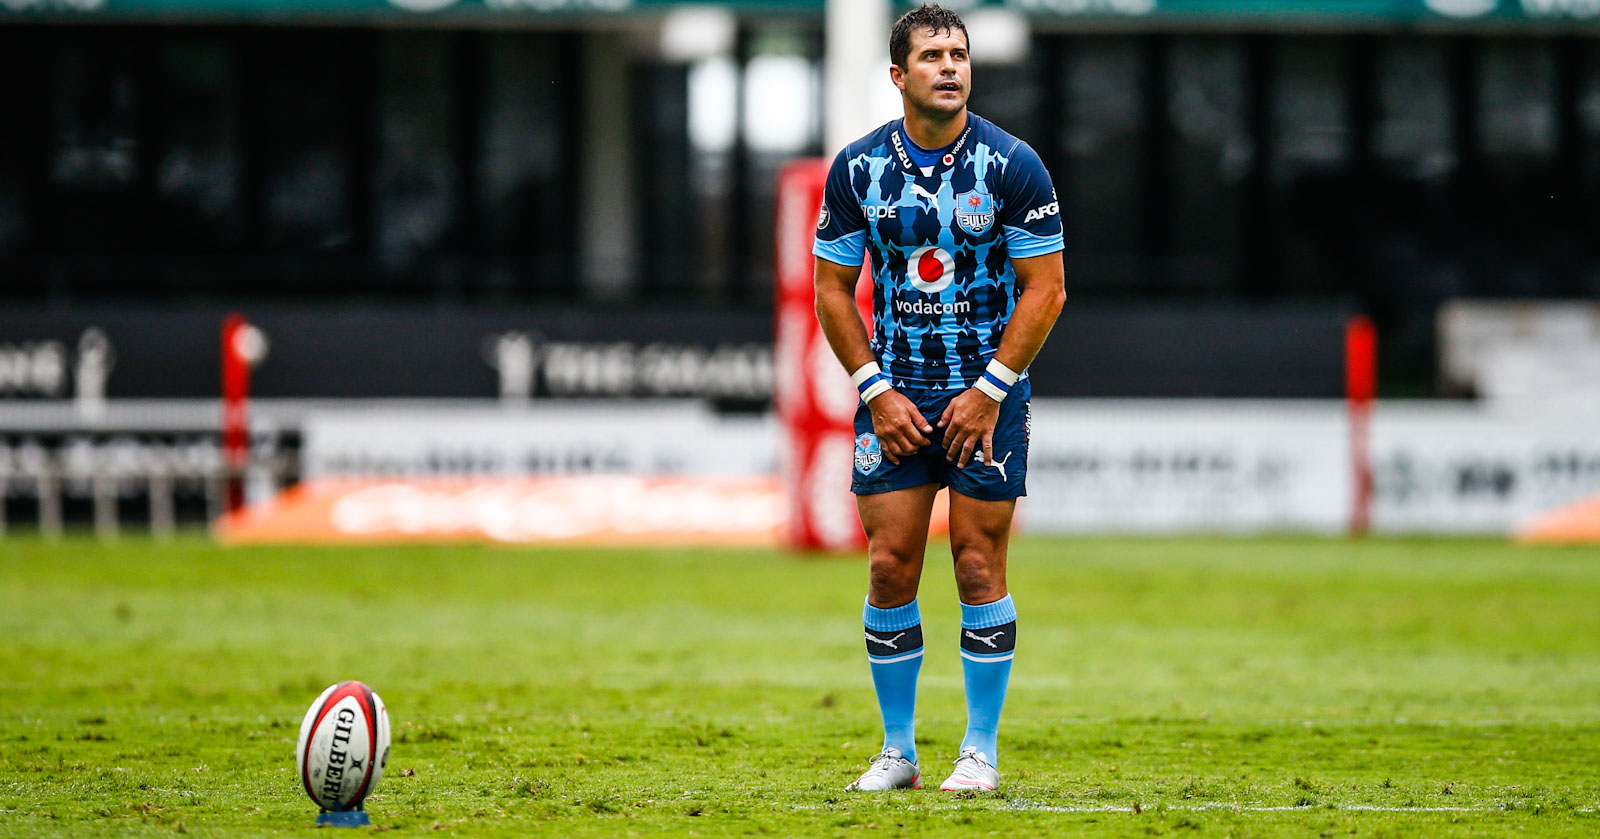 Morne Steyn will make his 100th provincial appearance for the Vodacom Bulls